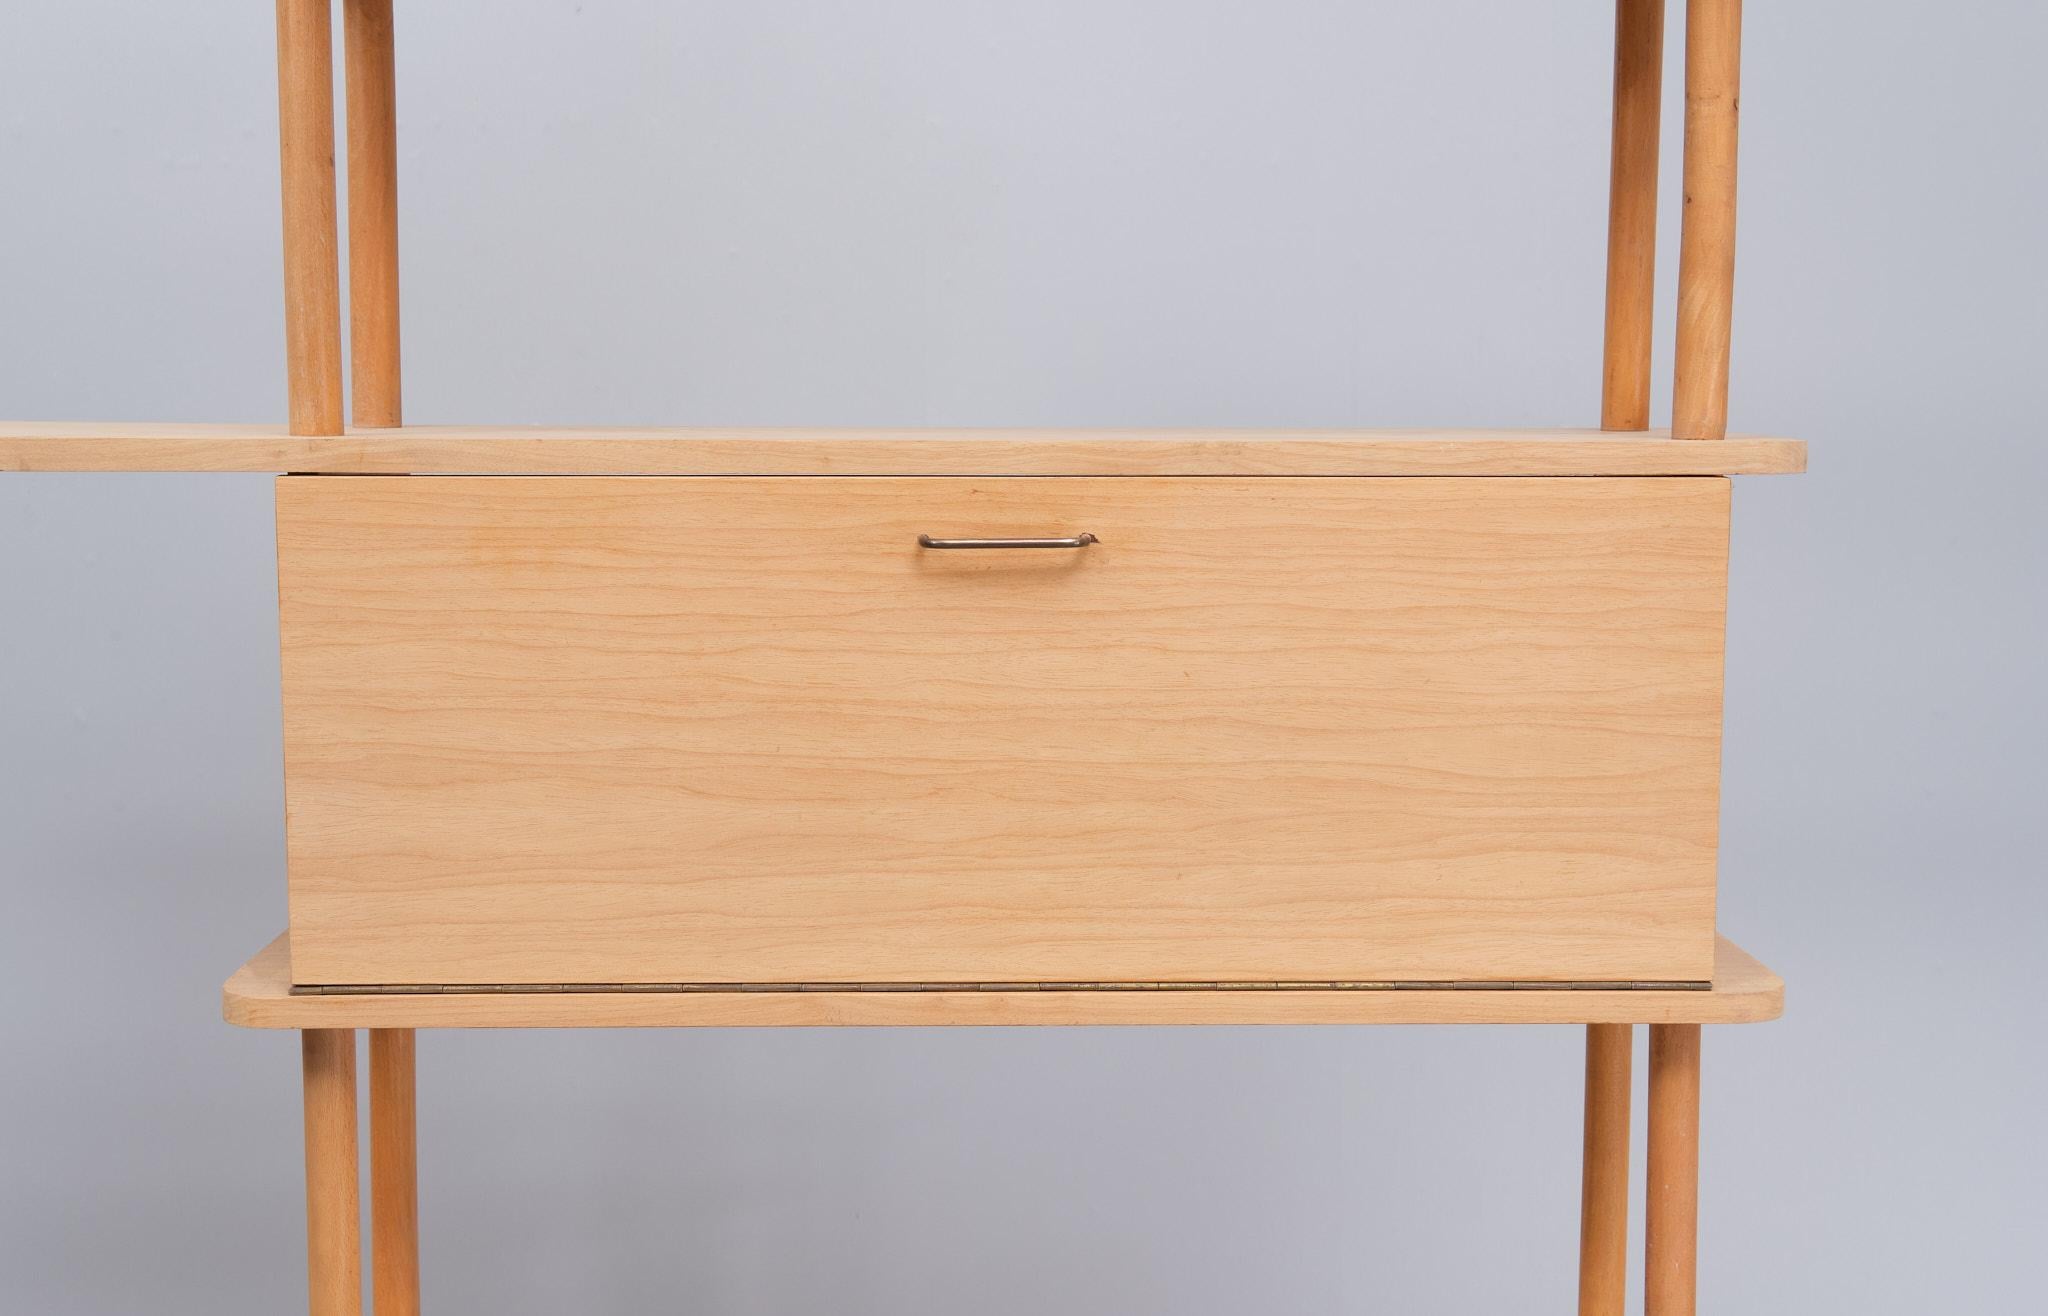 Vintage stick cabinet. A design by Willem Lutjens for Den Boer Gouda, the Netherlands, 1960s. The Beechwood shelves are pure ,so no lacker or wax .
Beechwood cabinet with clean lines, can be used as a bookcase against the wall, but also suitable as